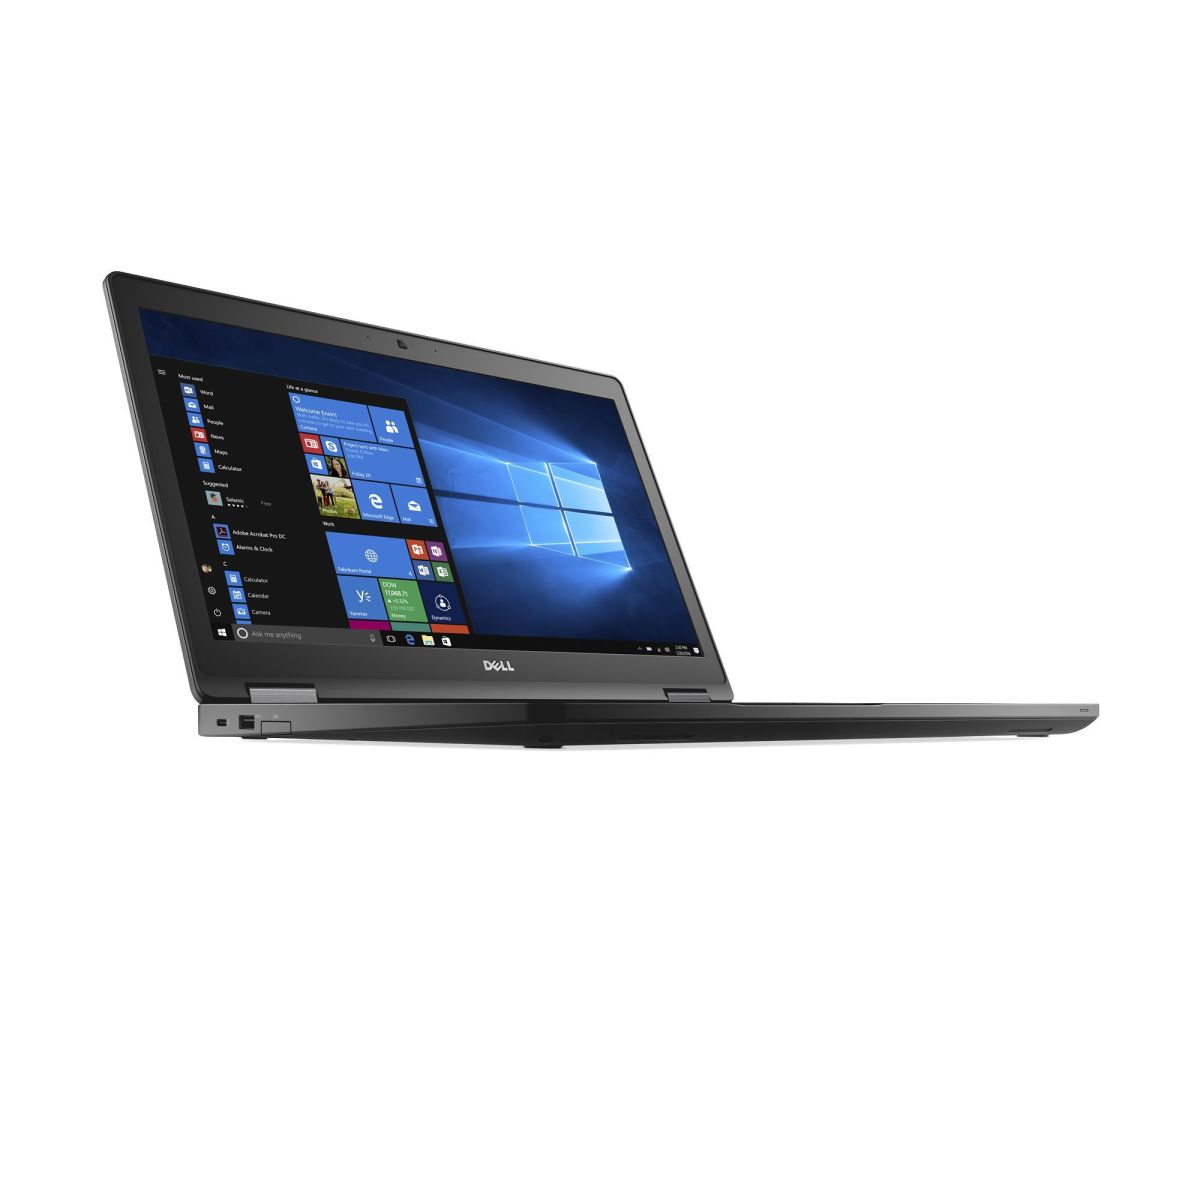 Dell Latitude C Family Model Ppx Drivers